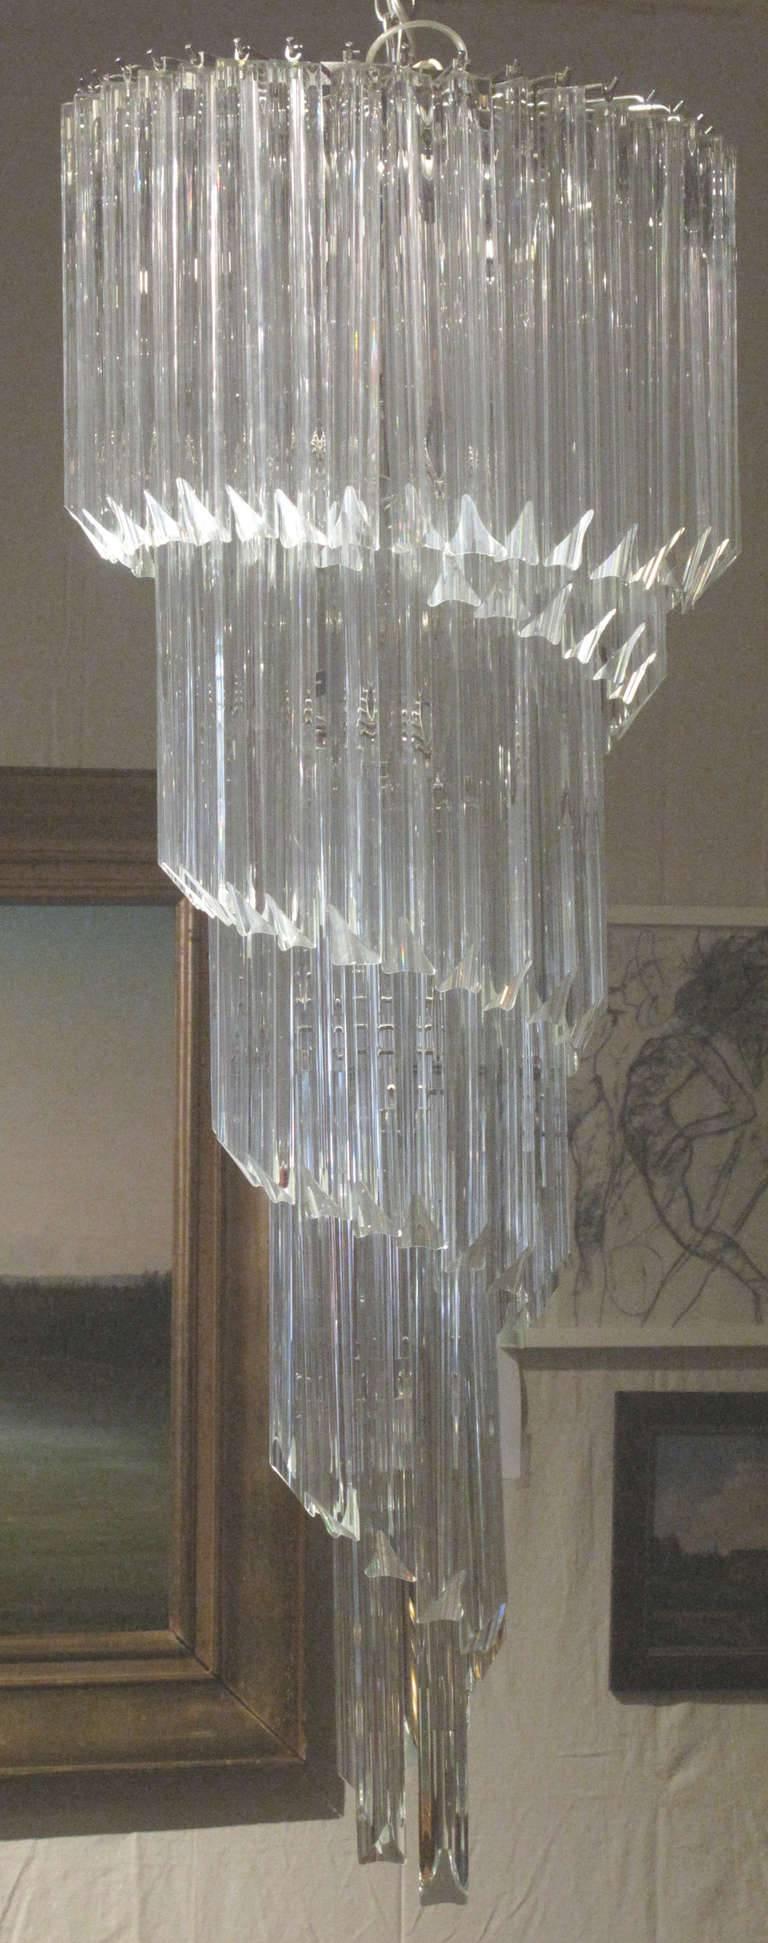 1960s Italian large spiral form chandelier, probably by Camer. The Murano glass prisms fitted on a nickel-plated armature.